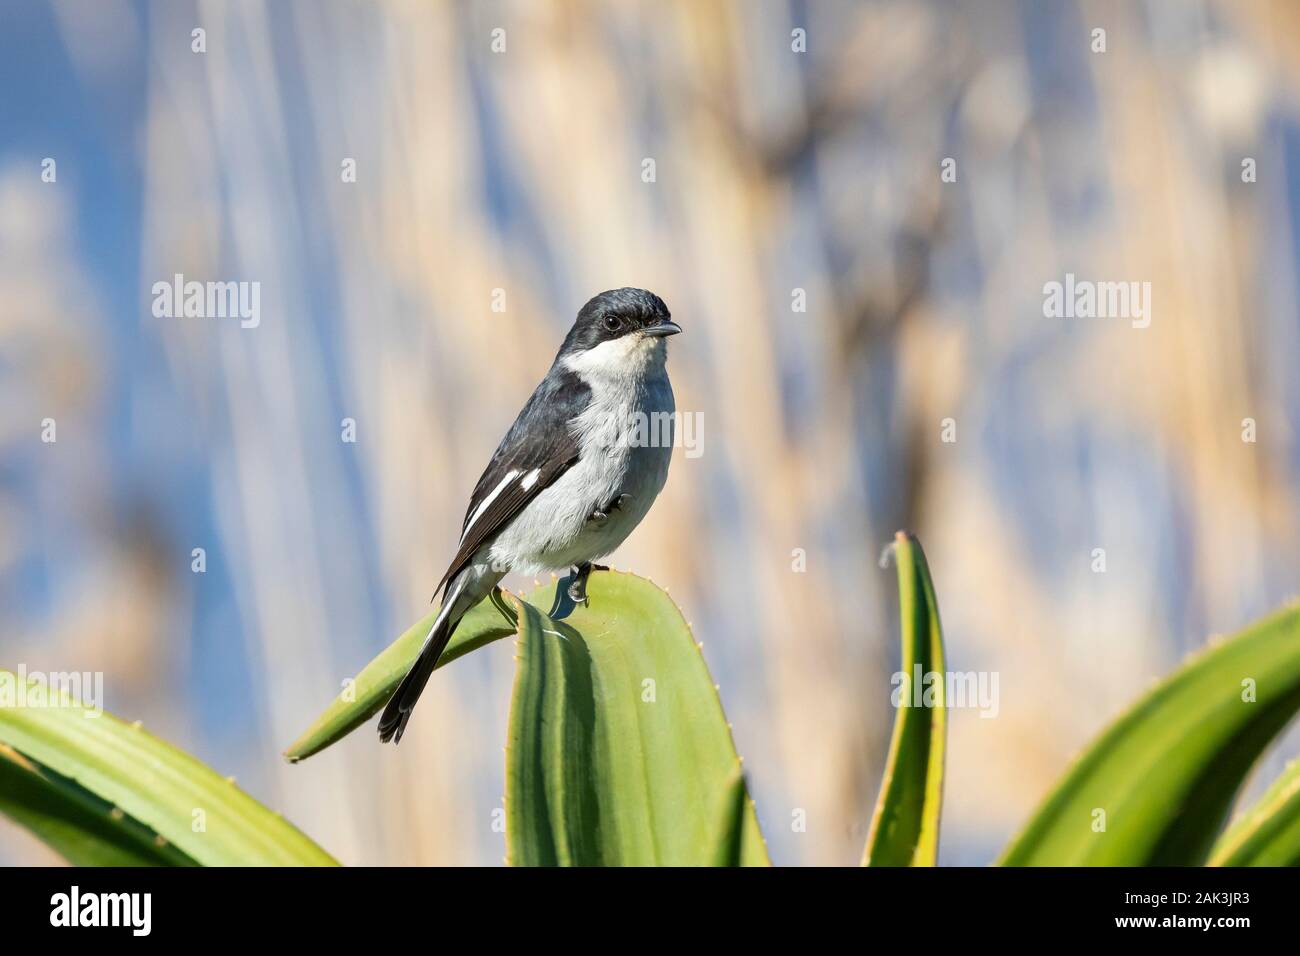 Fiscal Flycatcher (Sigelus silens) perched on aloe leaf, Breede River, Western Cape, South Africa Stock Photo